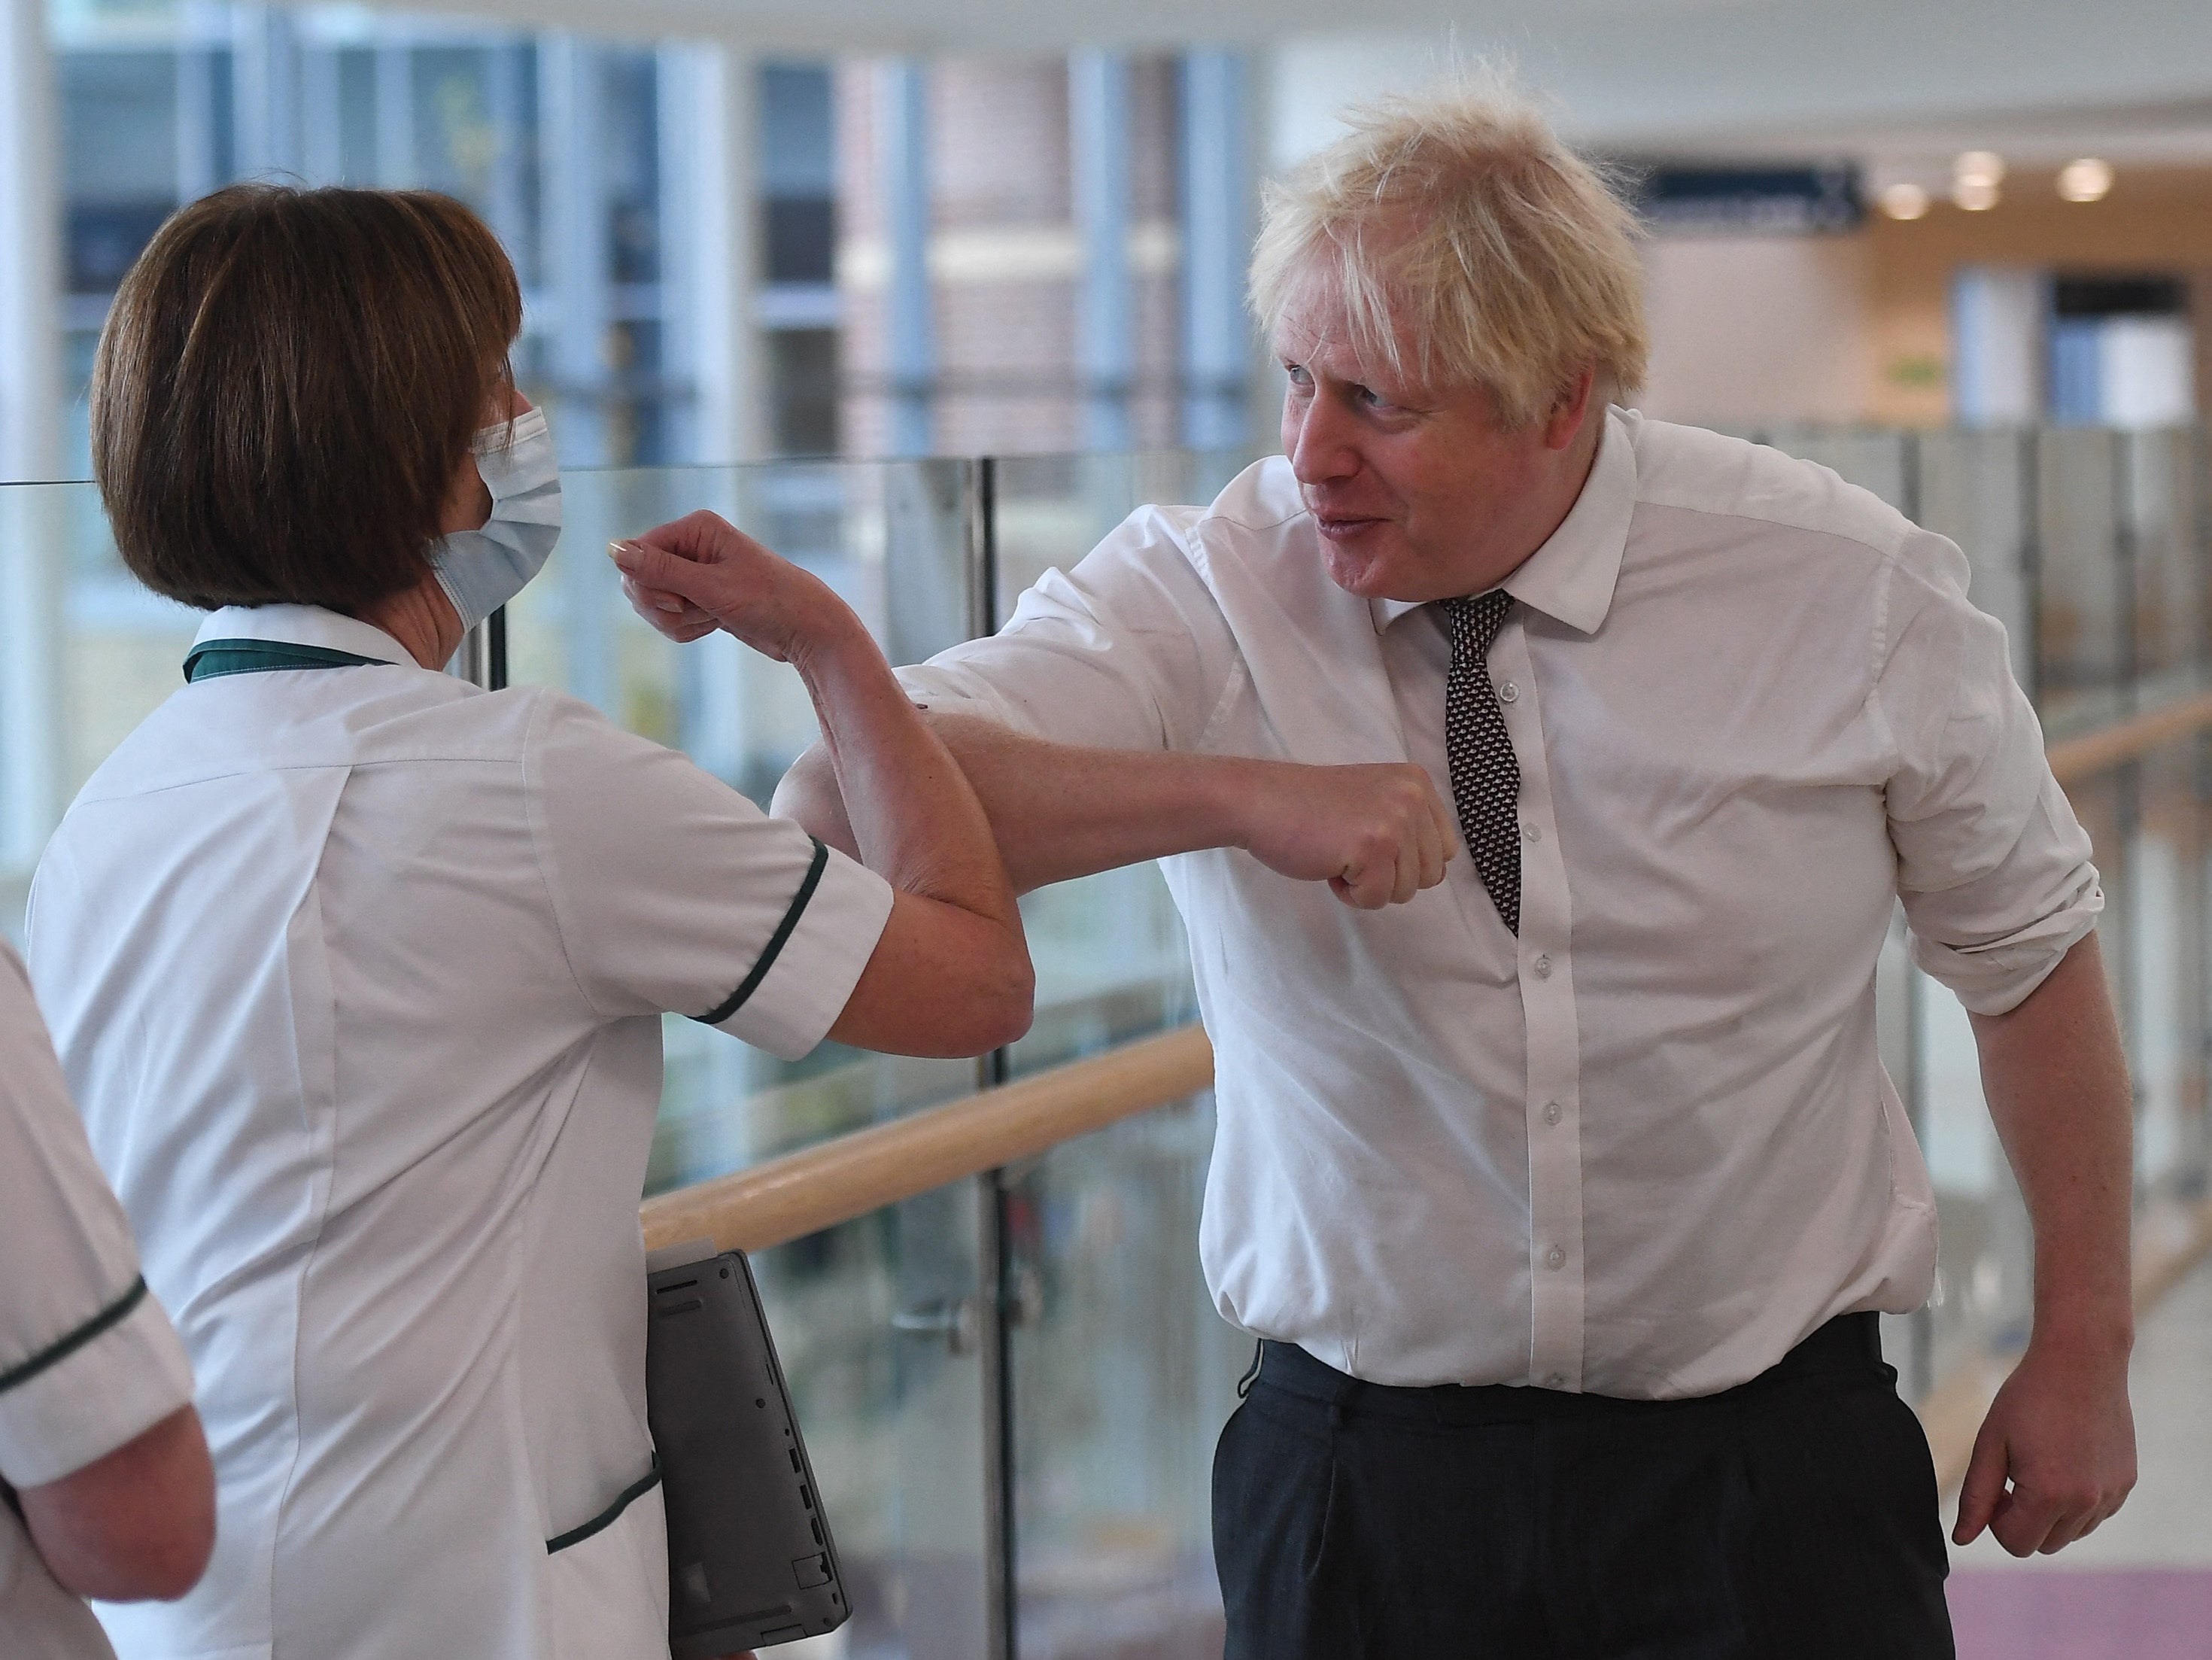 On top of everything else, Johnson failed to wear a mask on a hospital visit